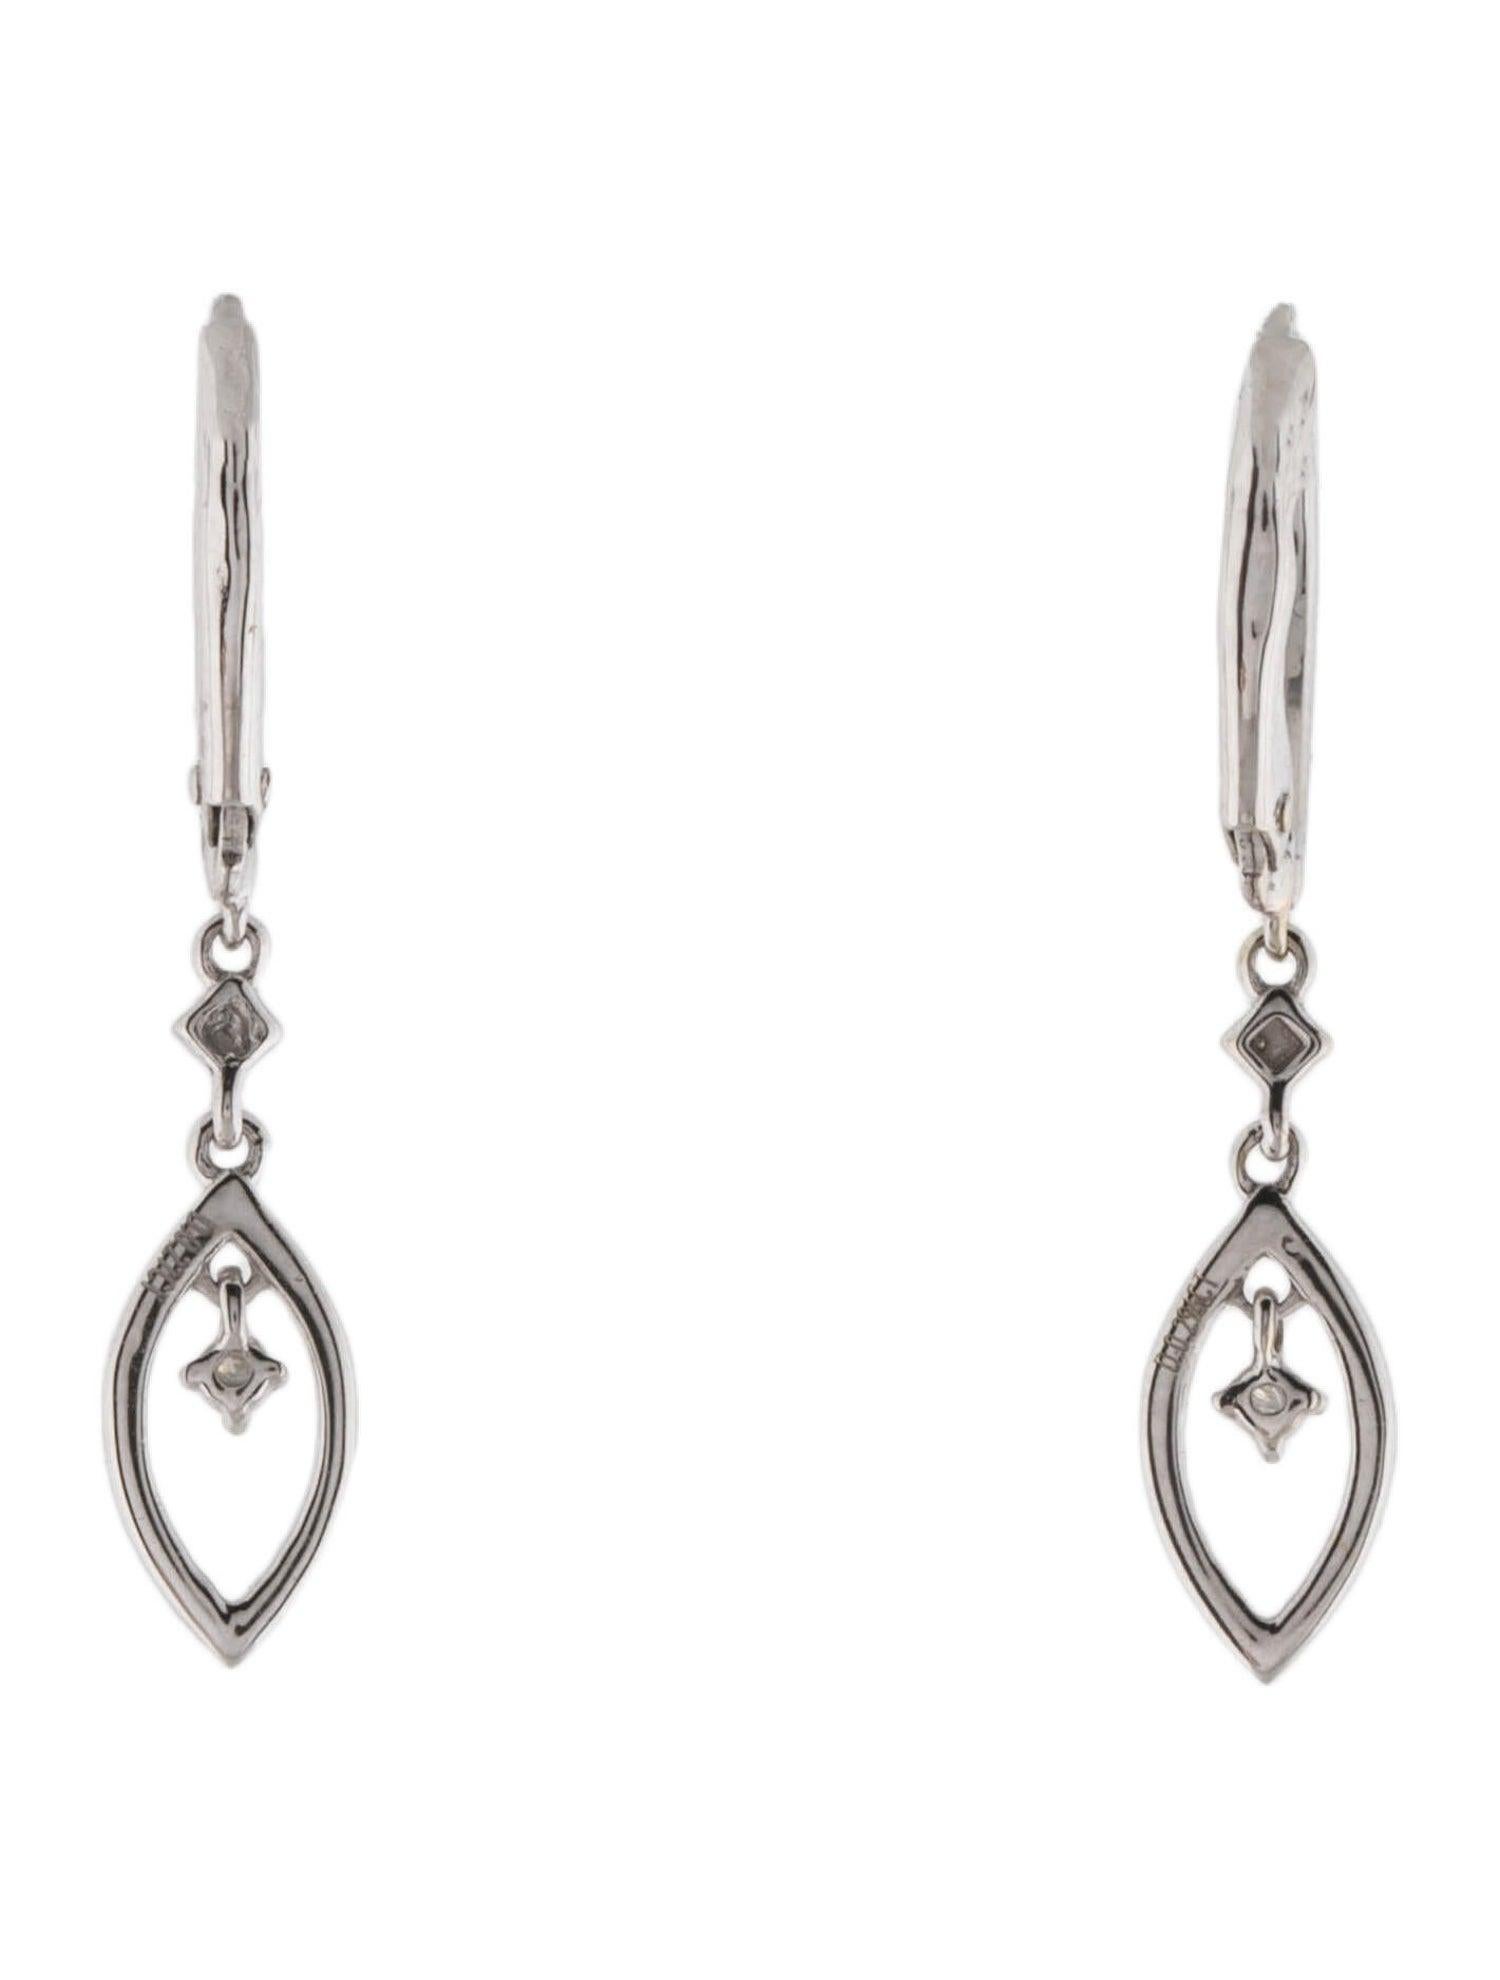 Round Cut 14K White Gold Rhodium-Plated Diamond Drop Earrings - 0.29ct Round Brilliant For Sale